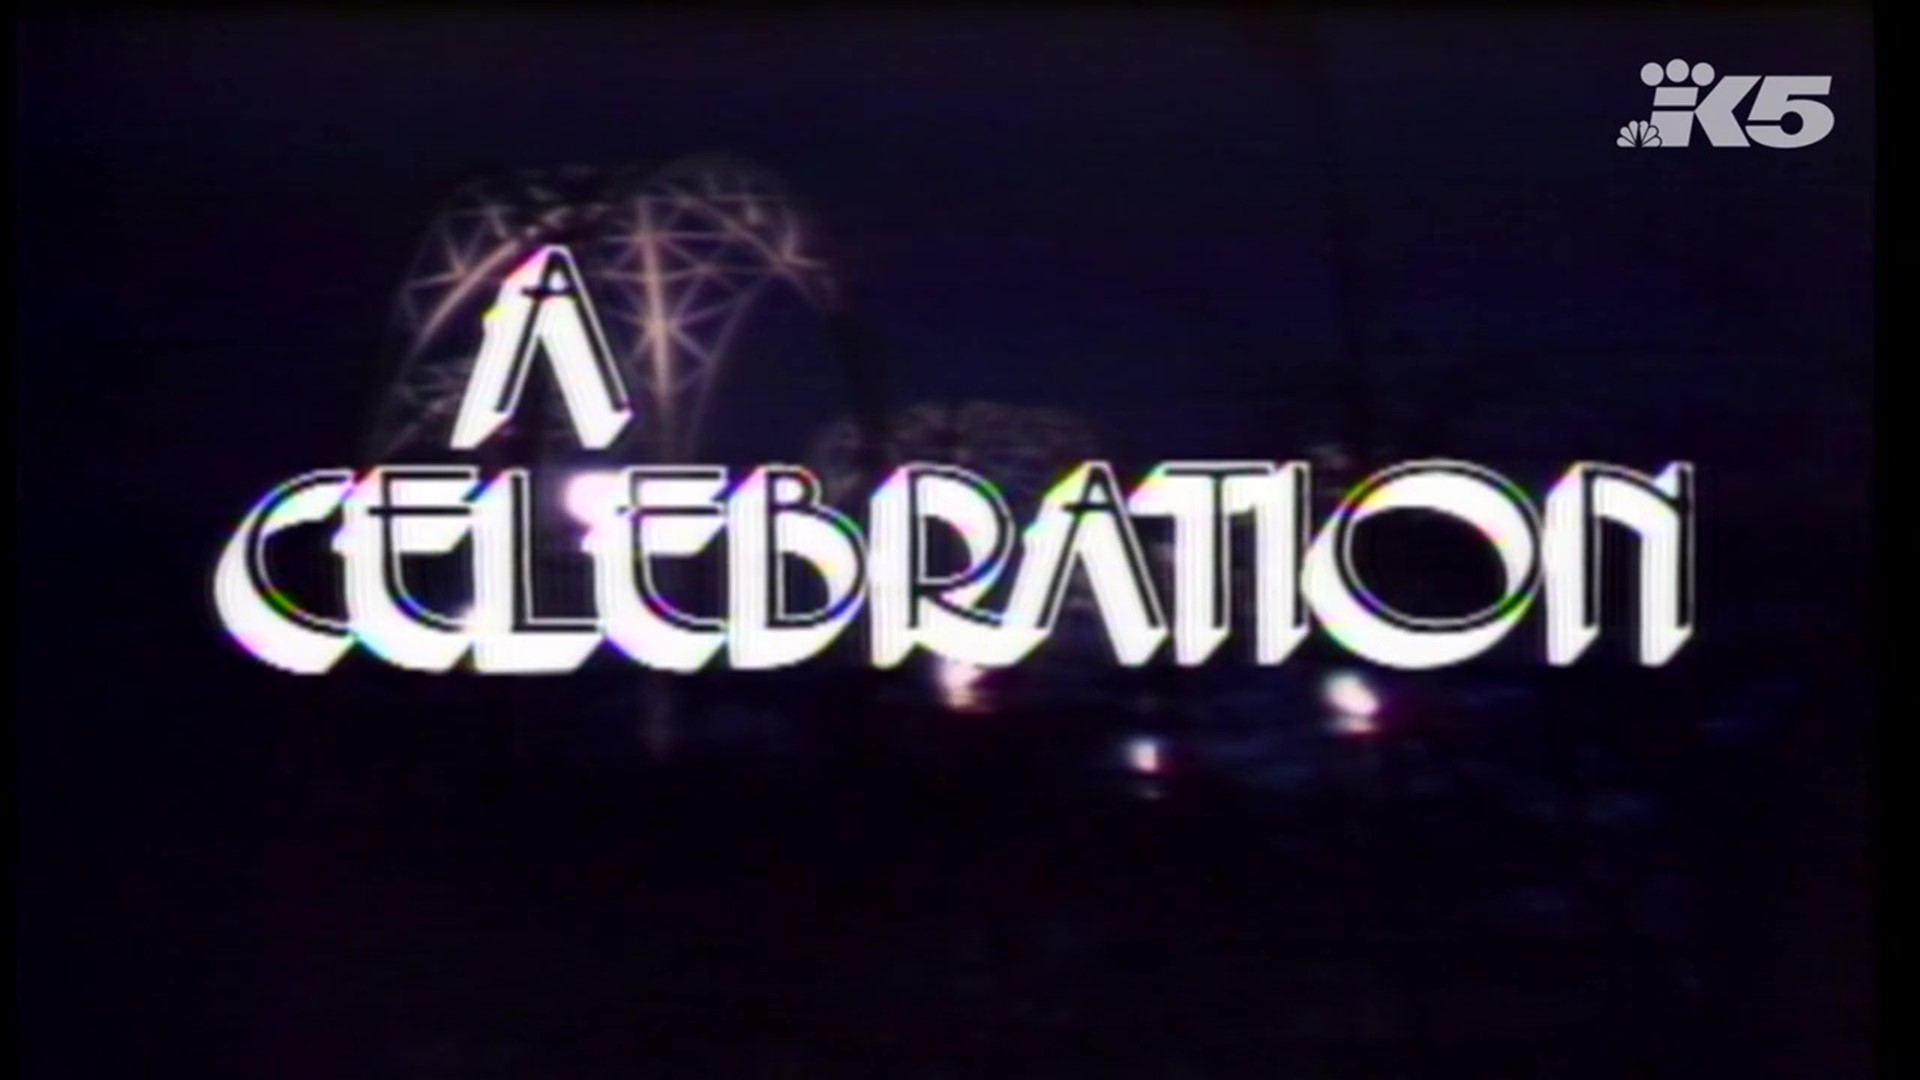 The 1972 special celebrates the station being on air a quarter of a century.